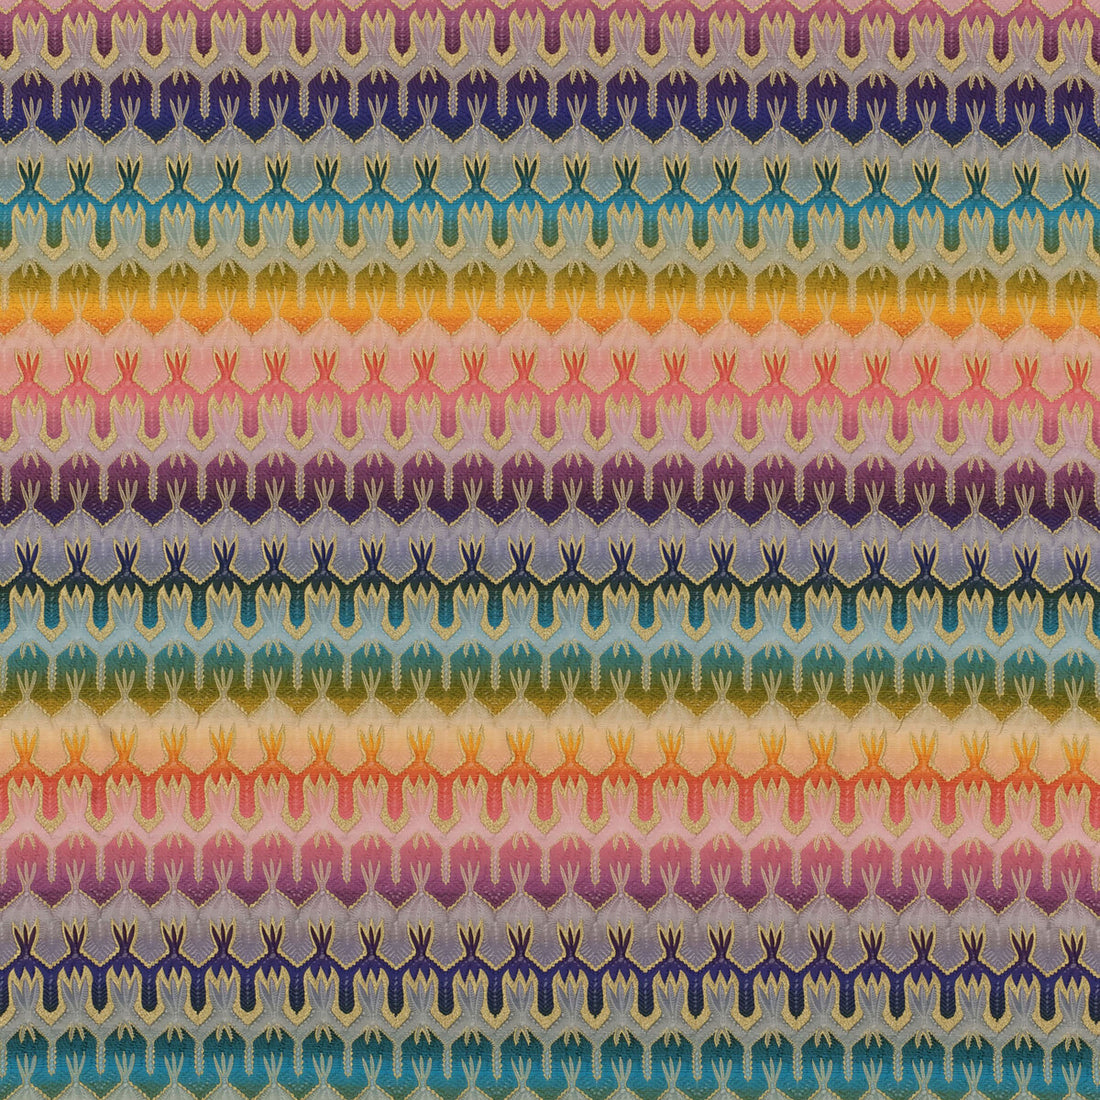 Pasadena fabric in 100 color - pattern 36179.517.0 - by Kravet Couture in the Missoni Home collection